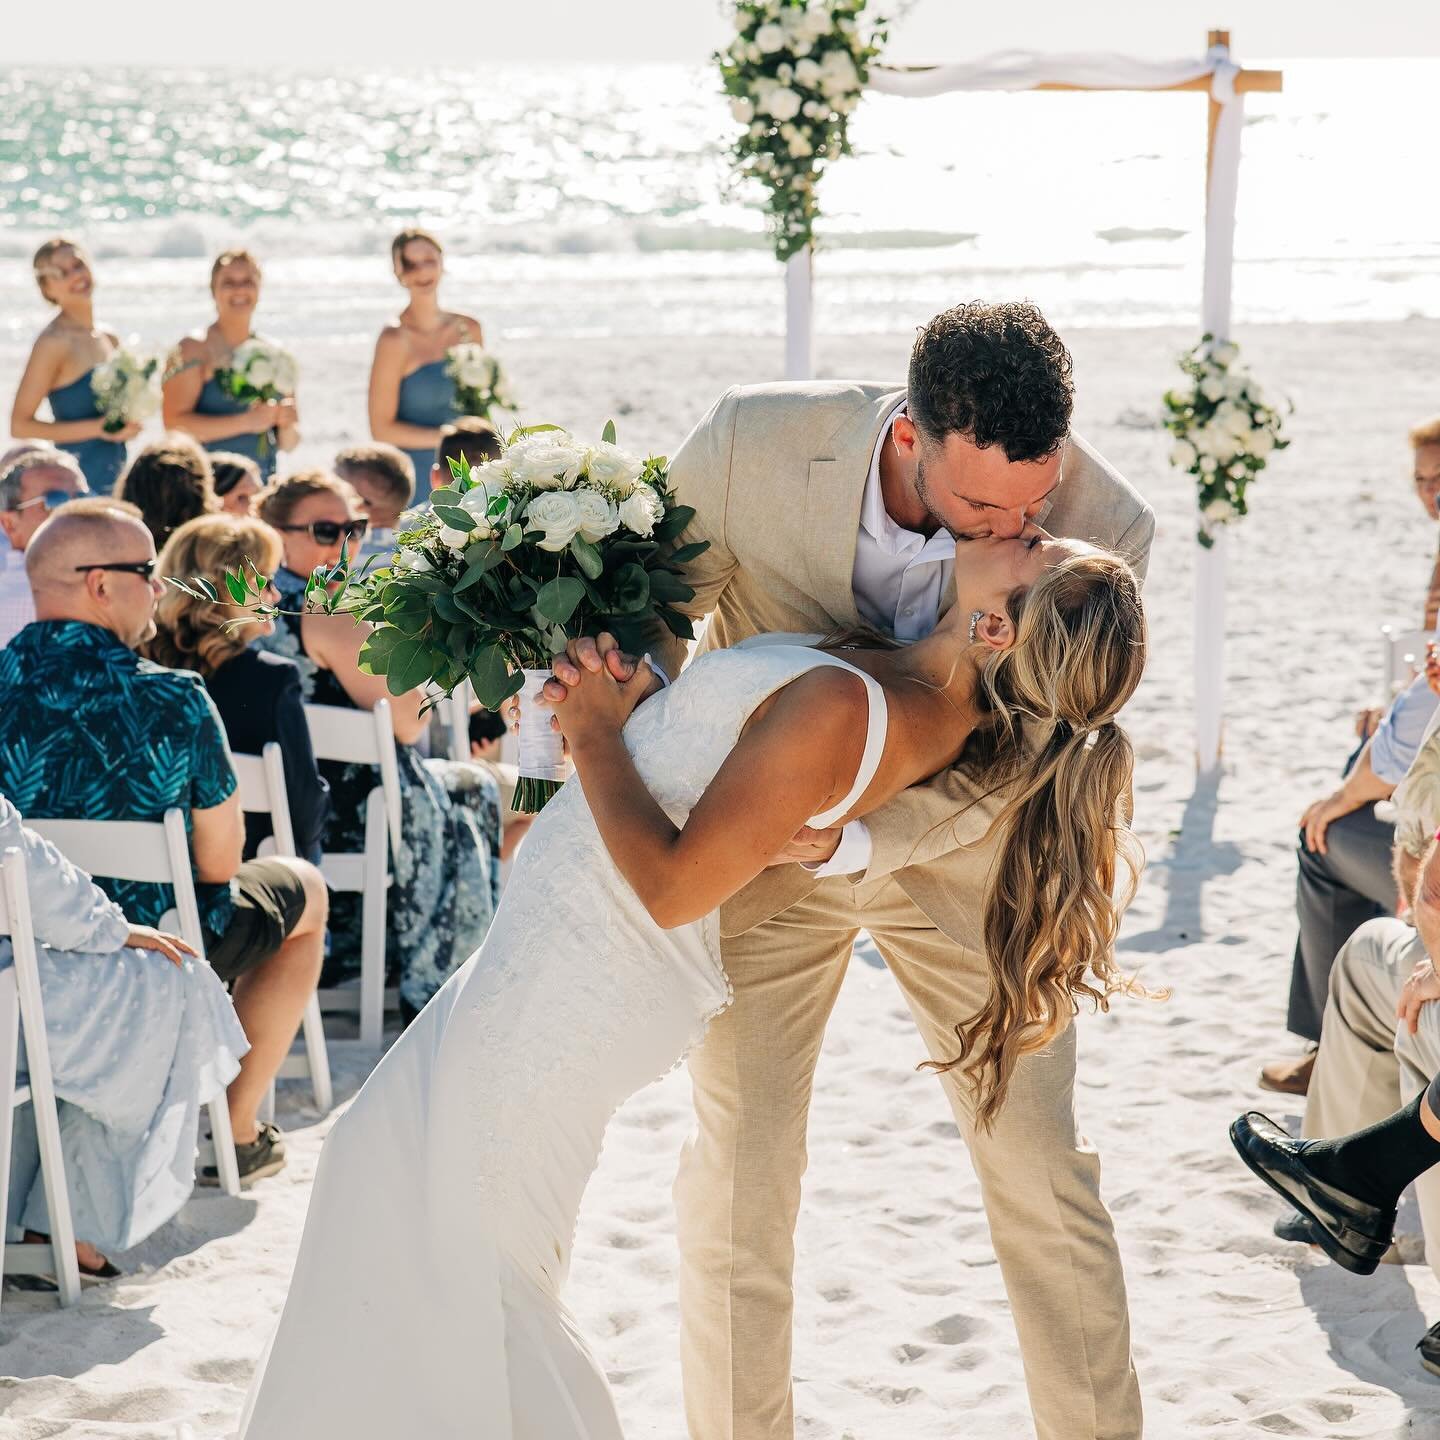 That amazing feeling when you get to marry your best friend surrounded by your favorite people in a tropical paradise! 

Alayna and Eric exchanged vows on the beach, followed by a festive reception at The Grand Pavilion at @thesandbarami. 

Are you o